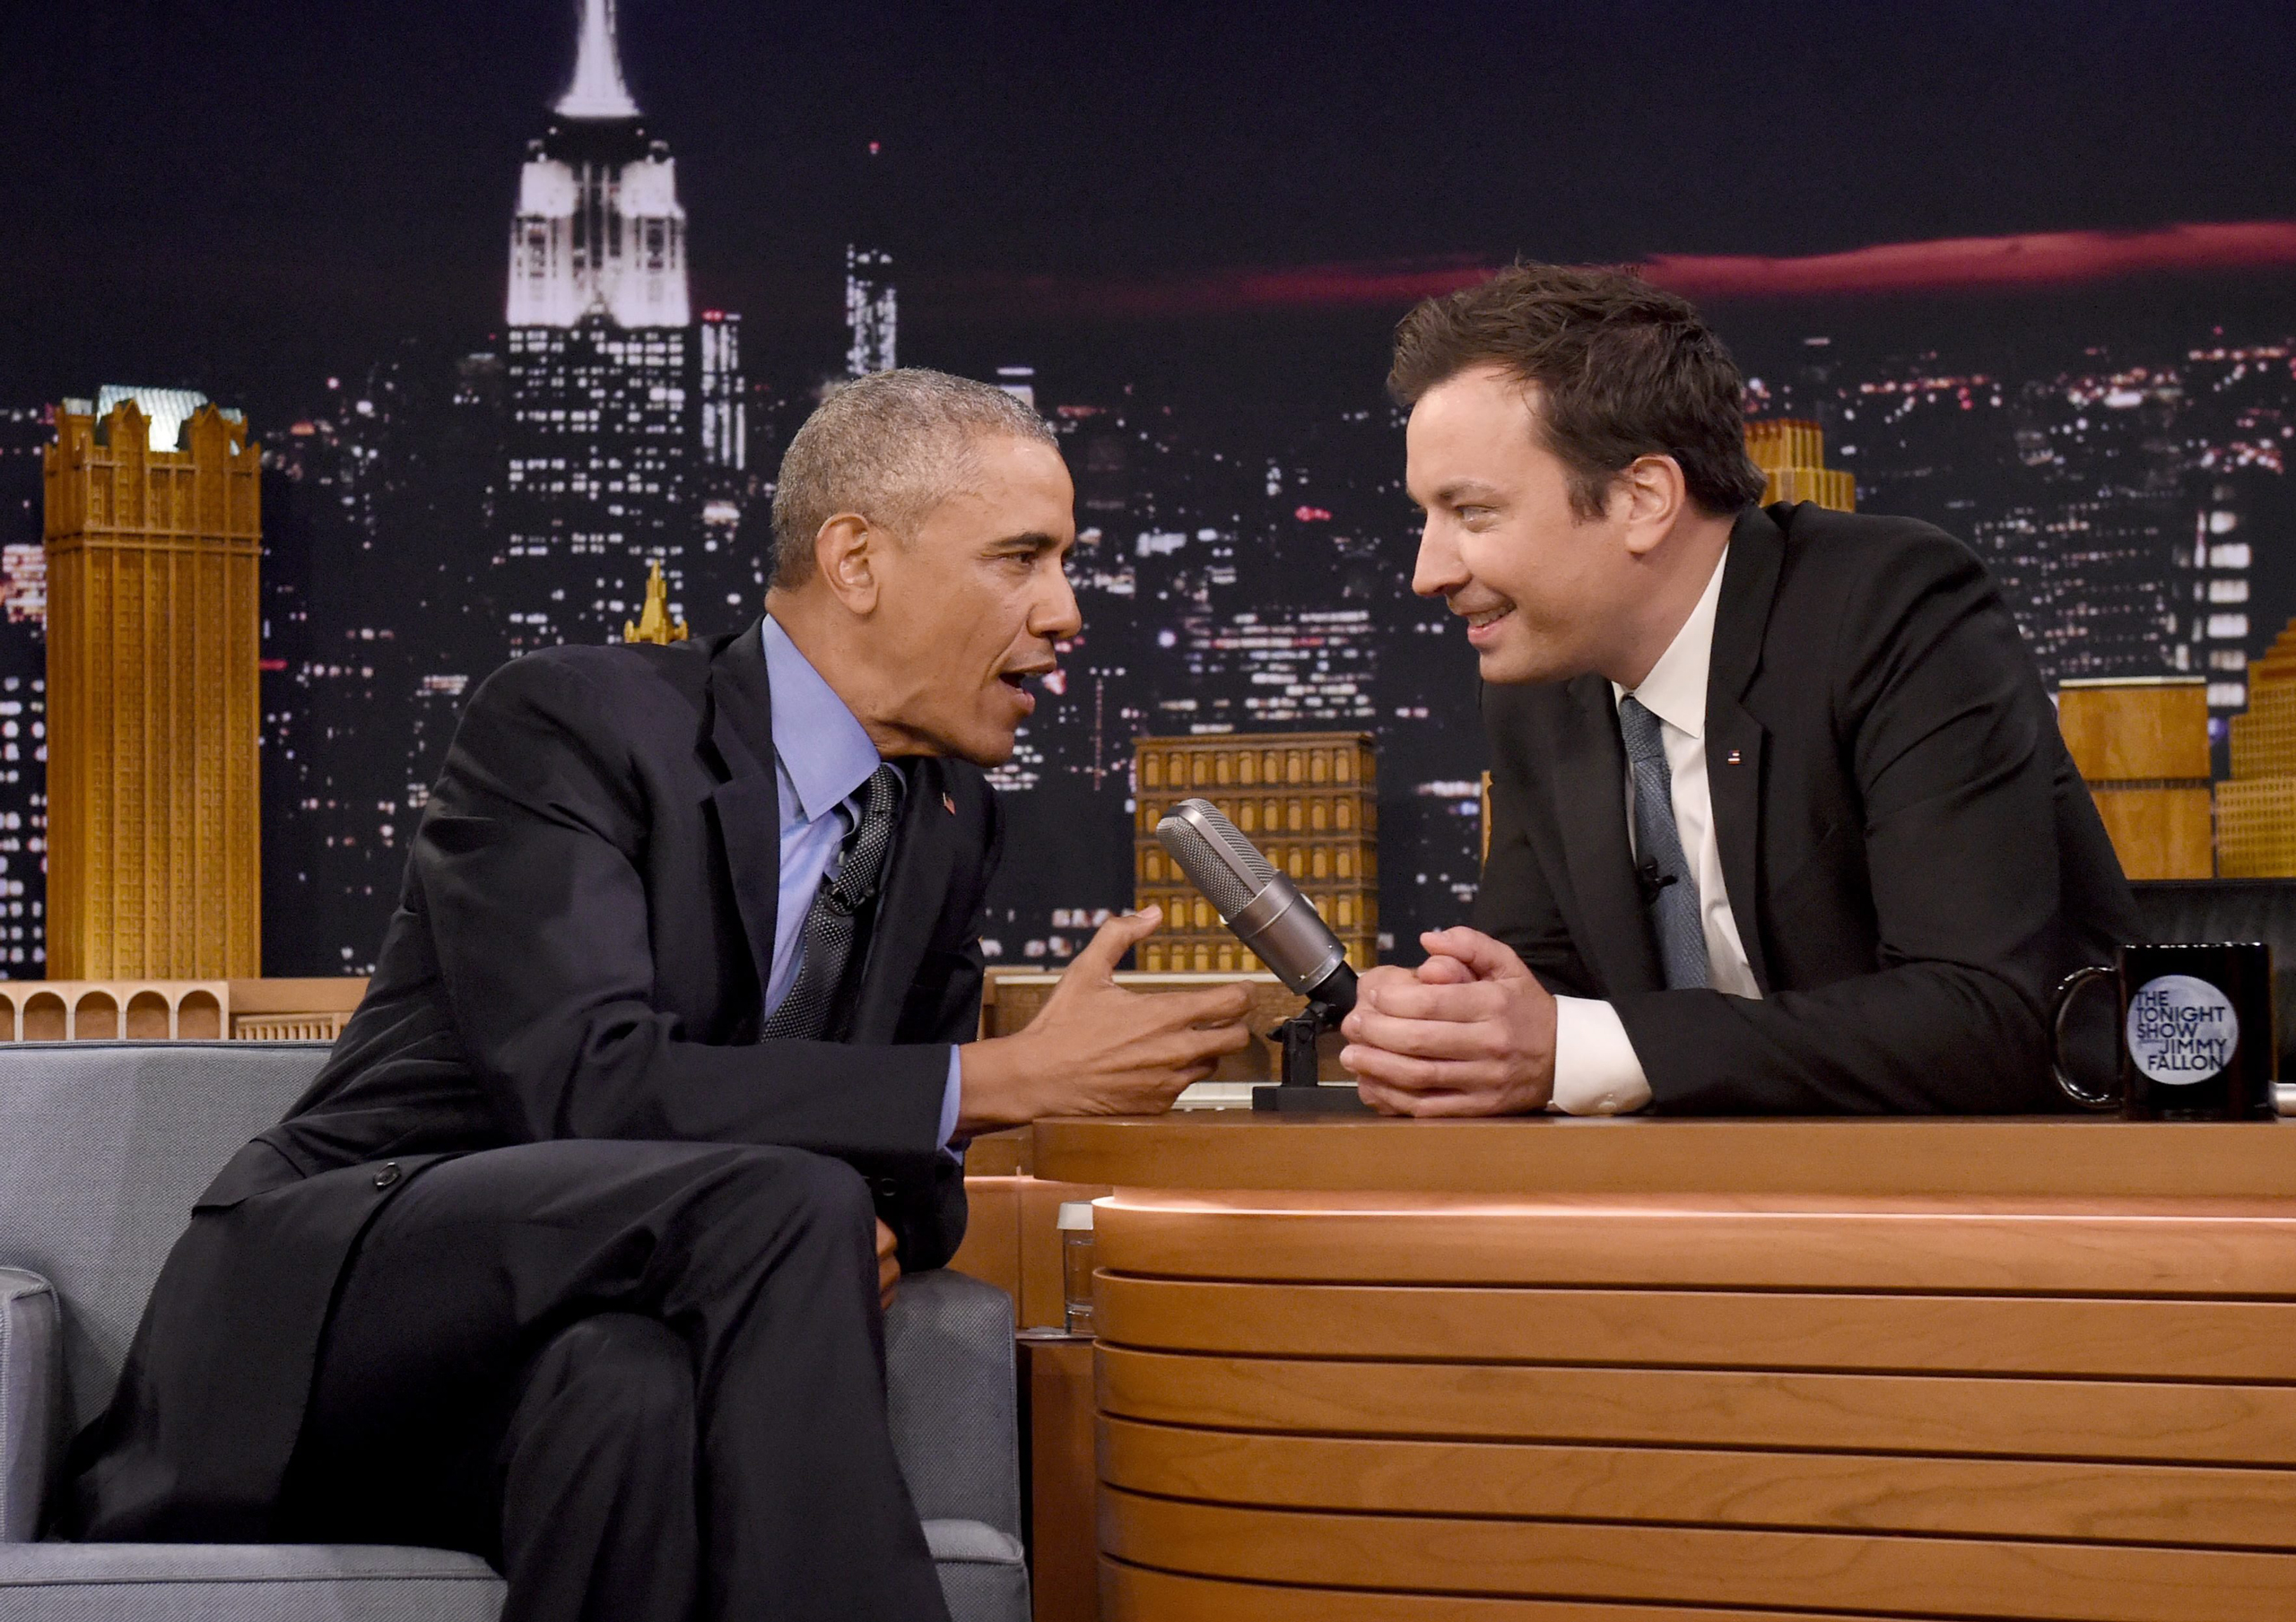 President Barack Obama speaks with Jimmy Fallon on the set of the Tonight Show at NBC Studios in New York on June 8, 2016. (Thomas A. Ferrara—EPA)